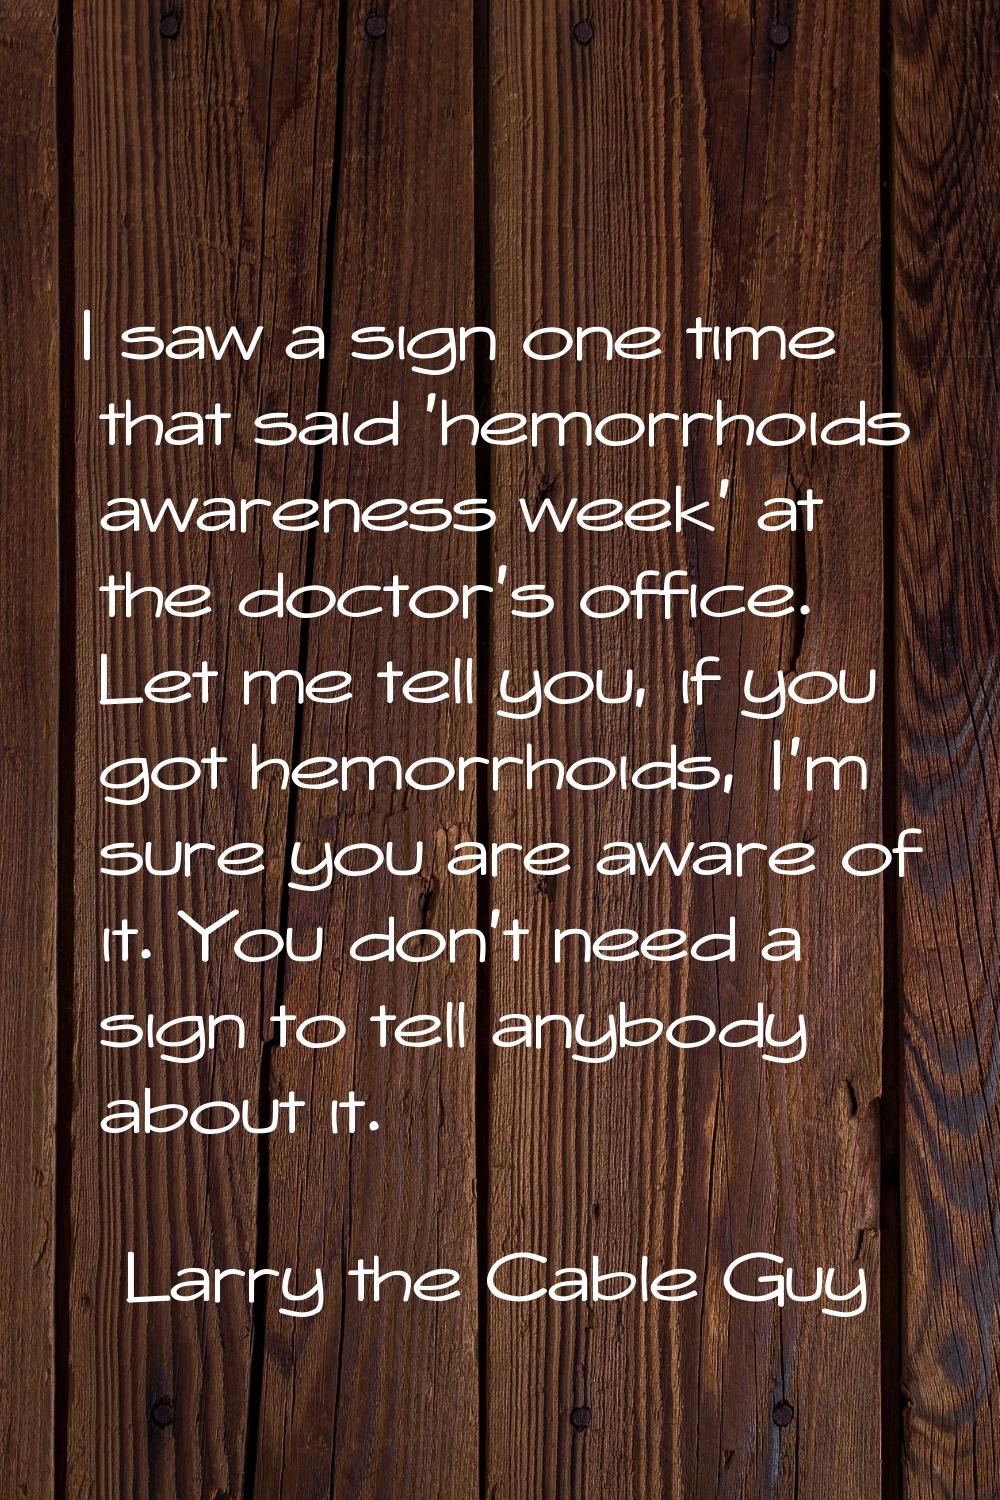 I saw a sign one time that said 'hemorrhoids awareness week' at the doctor's office. Let me tell yo